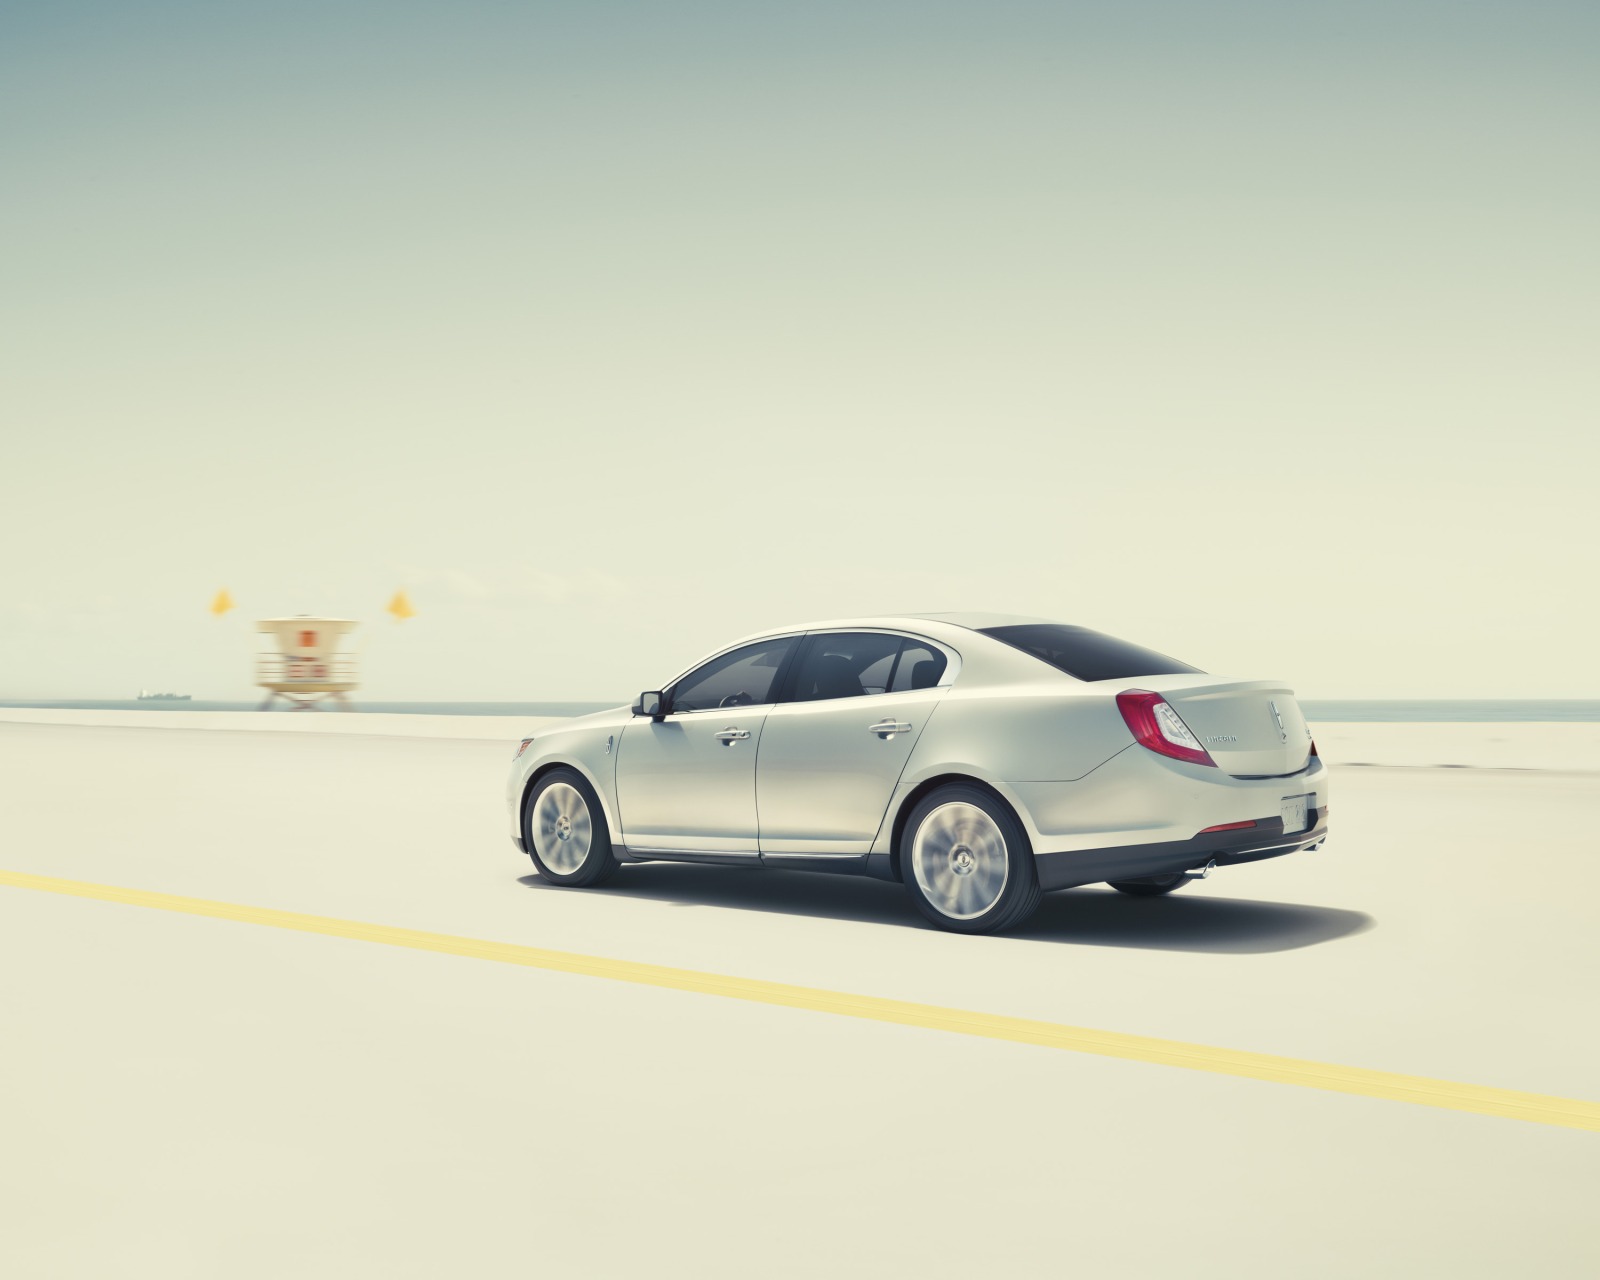 Lincoln 4 by Clemens ASCHER